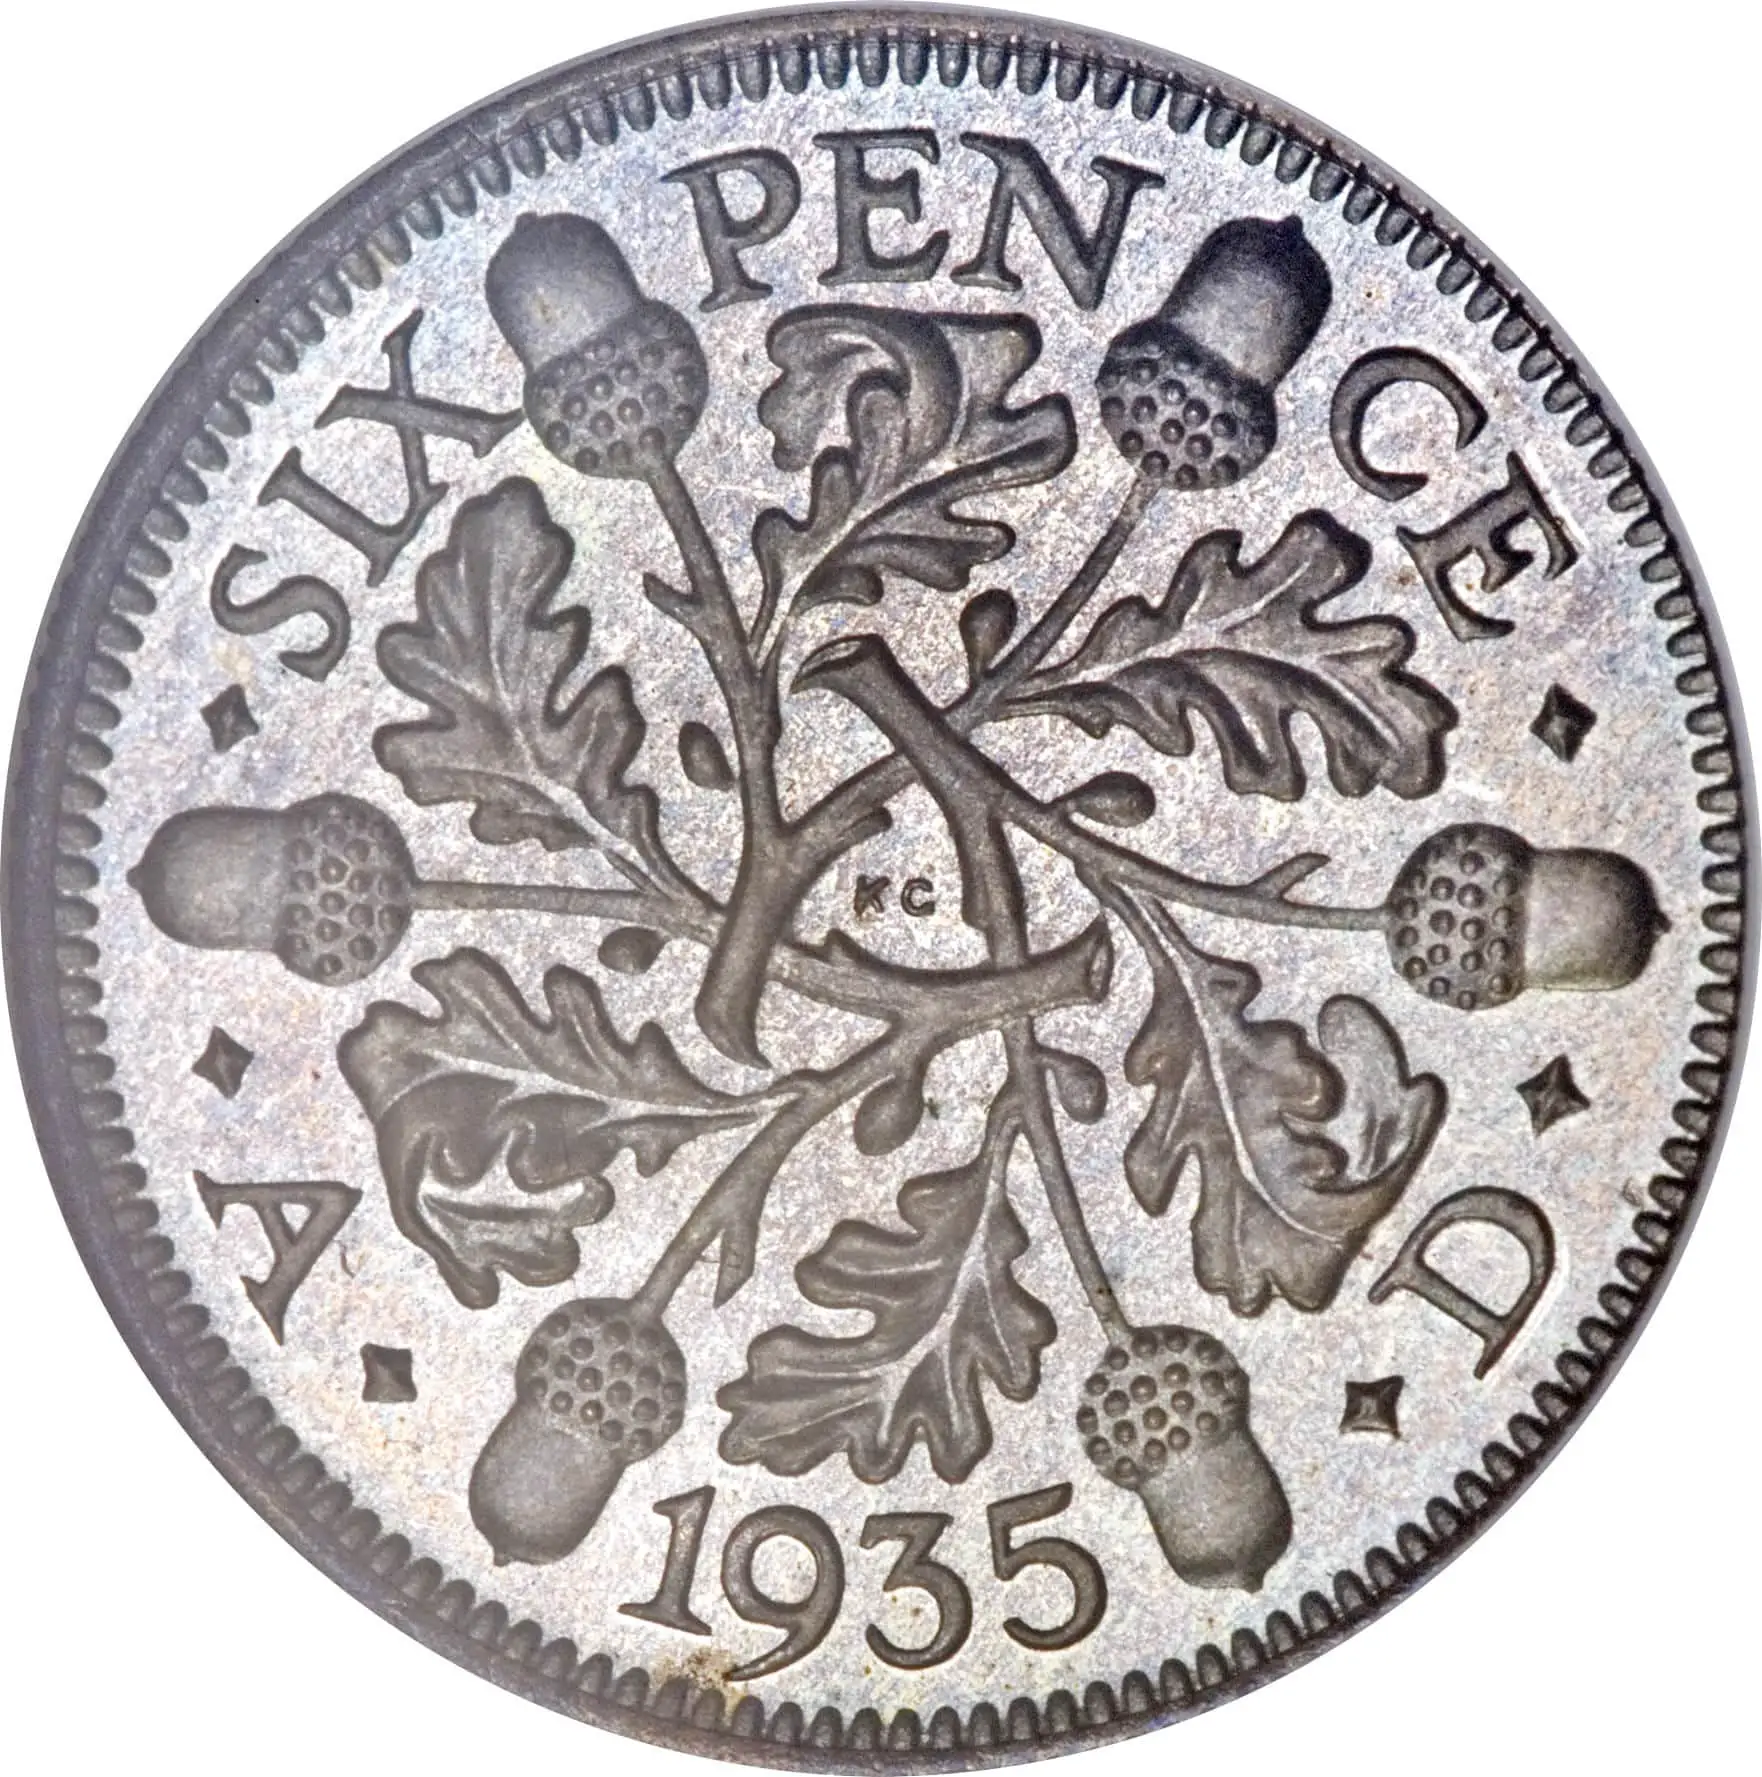 George V sixpence with acorn reverse design